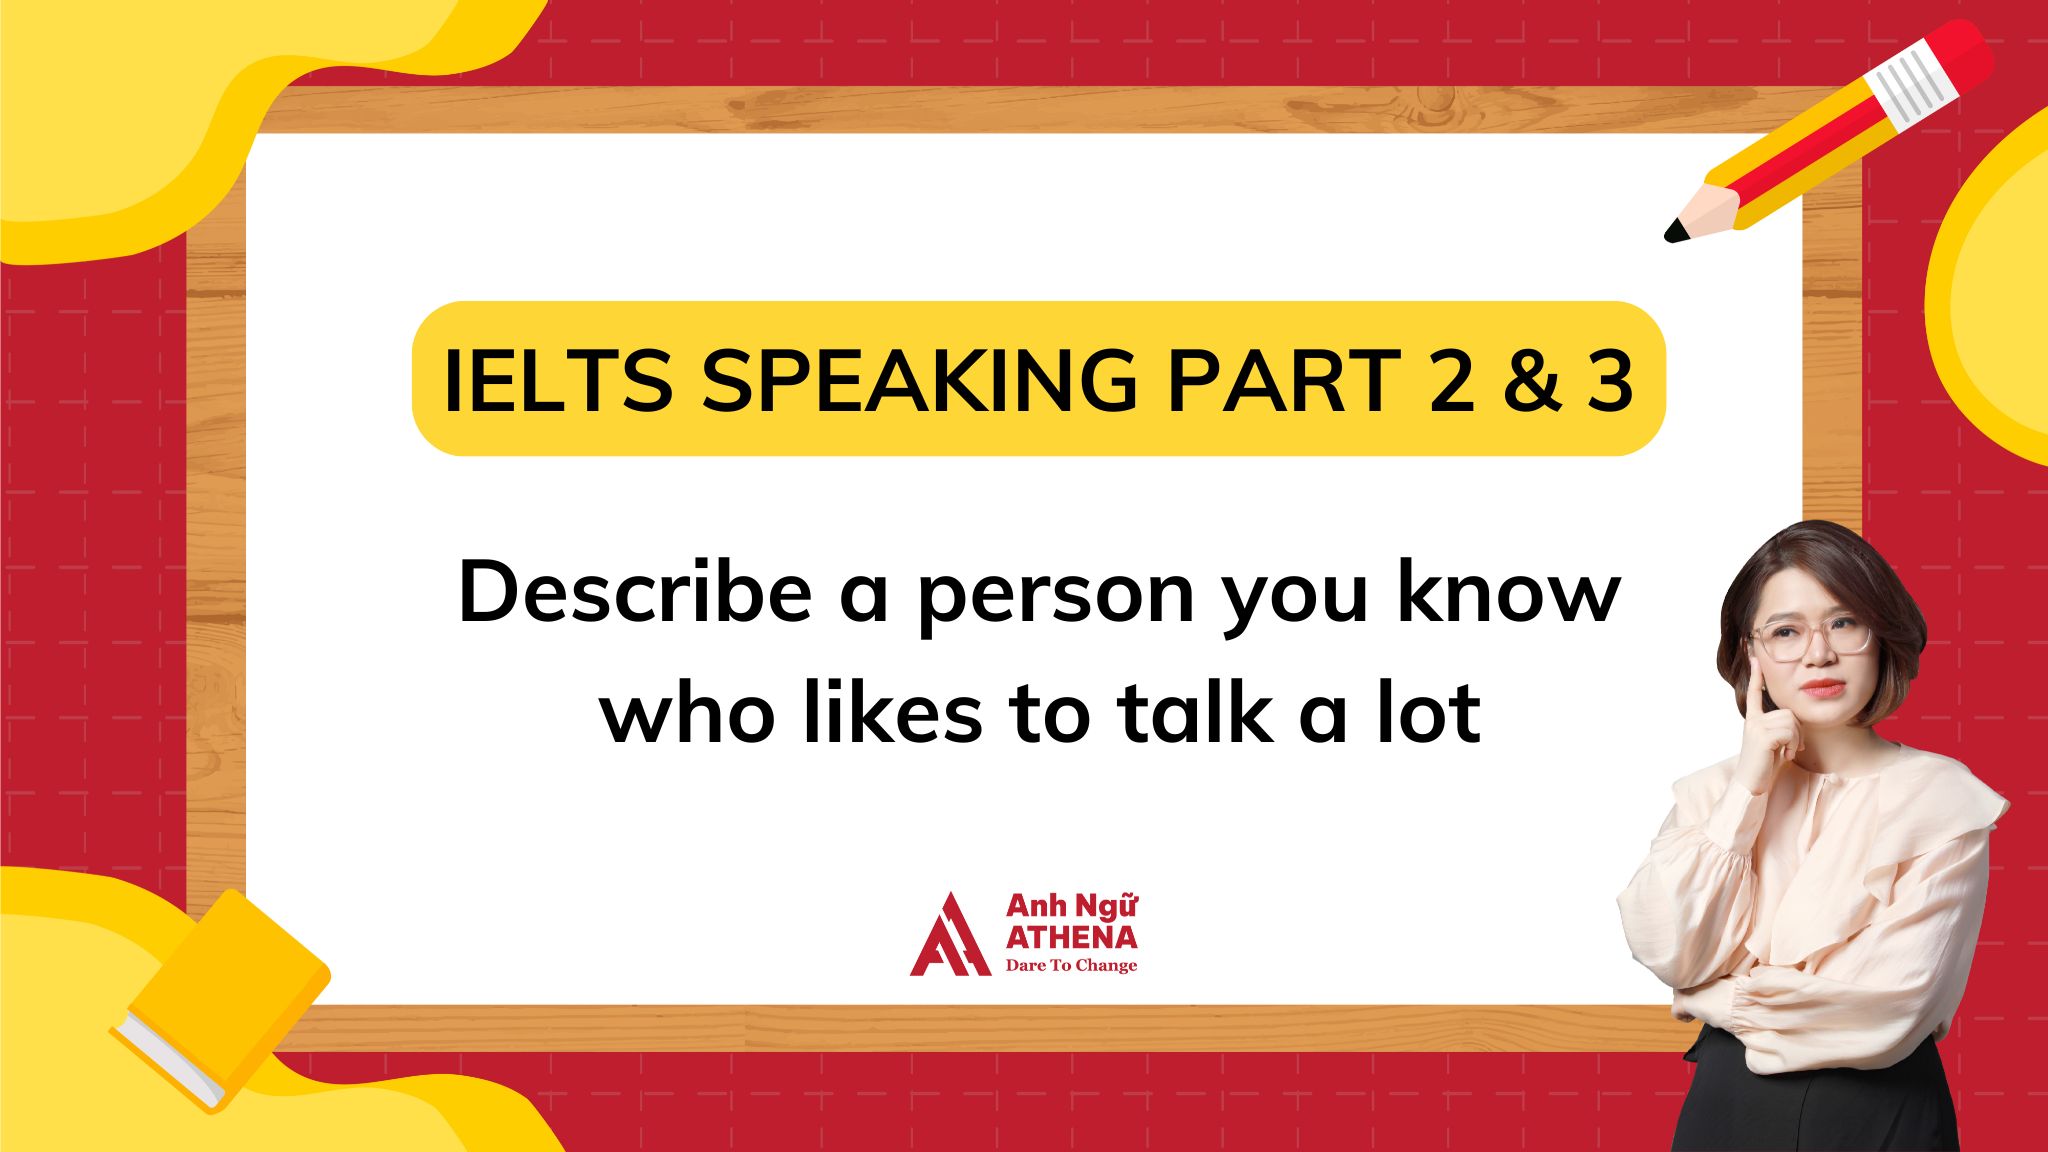 Giải đề: Describe a person you know who likes to talk a lot